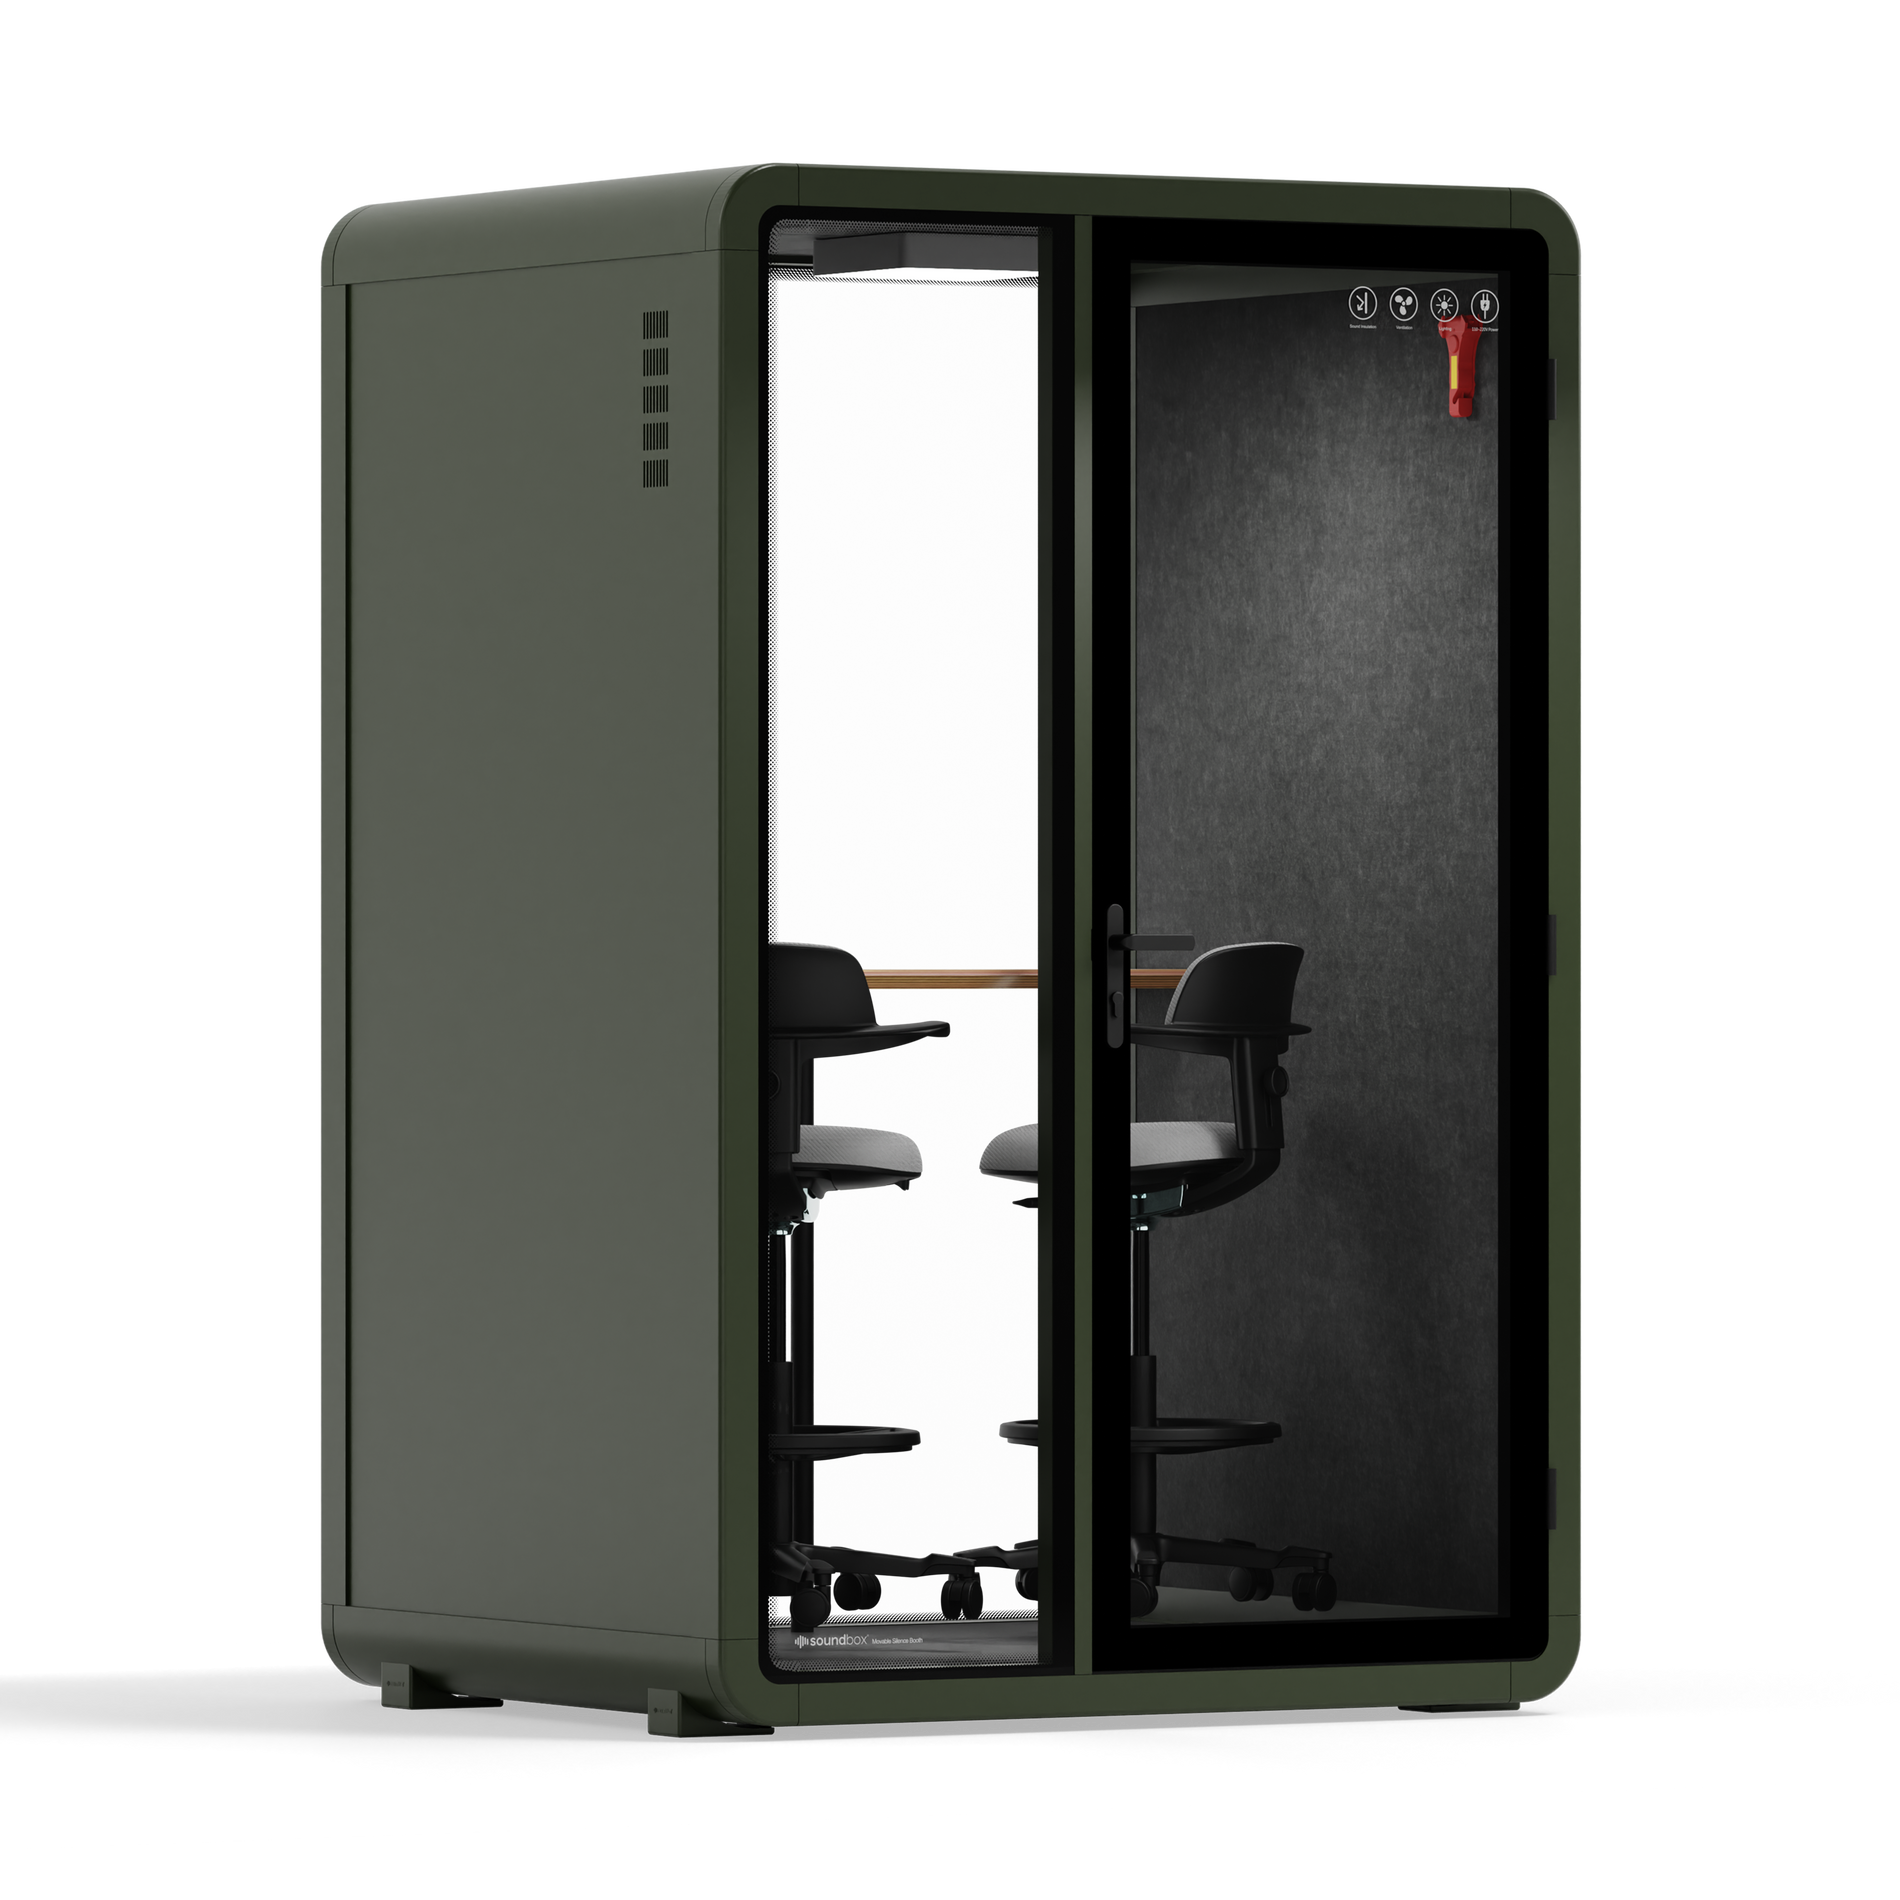 Quell - CoWorker - 2-persoons PodDark Green / Dark Gray / Dual Zoom Room + Device Shelf + 2 Barstools